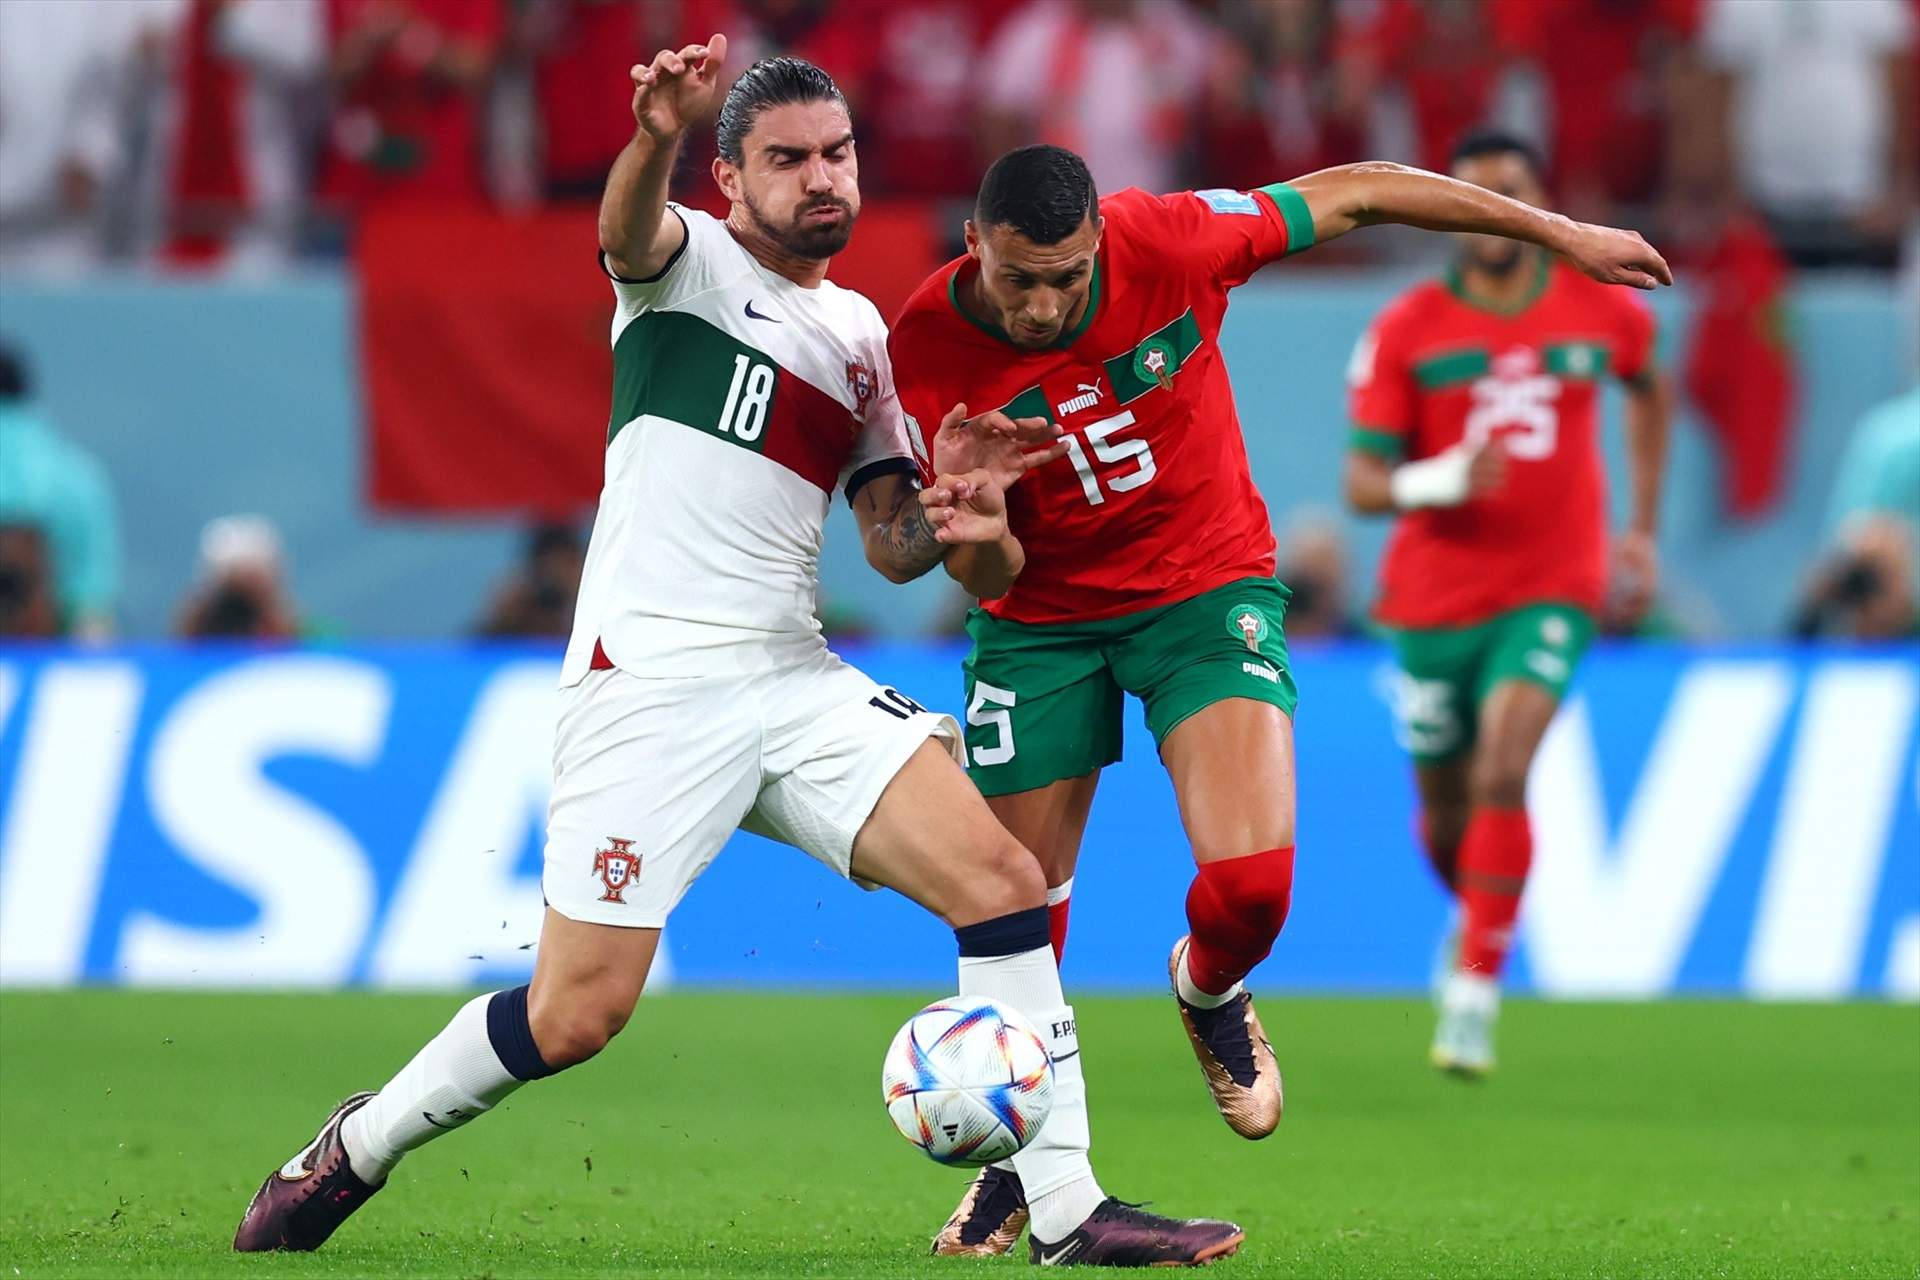 10 December 2022, Qatar, Doha: Portugal's Ruben Neves and Morocco's Selim Amallah battle for the ball during the FIFA World Cup Qatar 2022 Quarter-Final soccer match between Morocco and Portugal at Al-Thumama stadium. Photo: Tom Weller/dpa